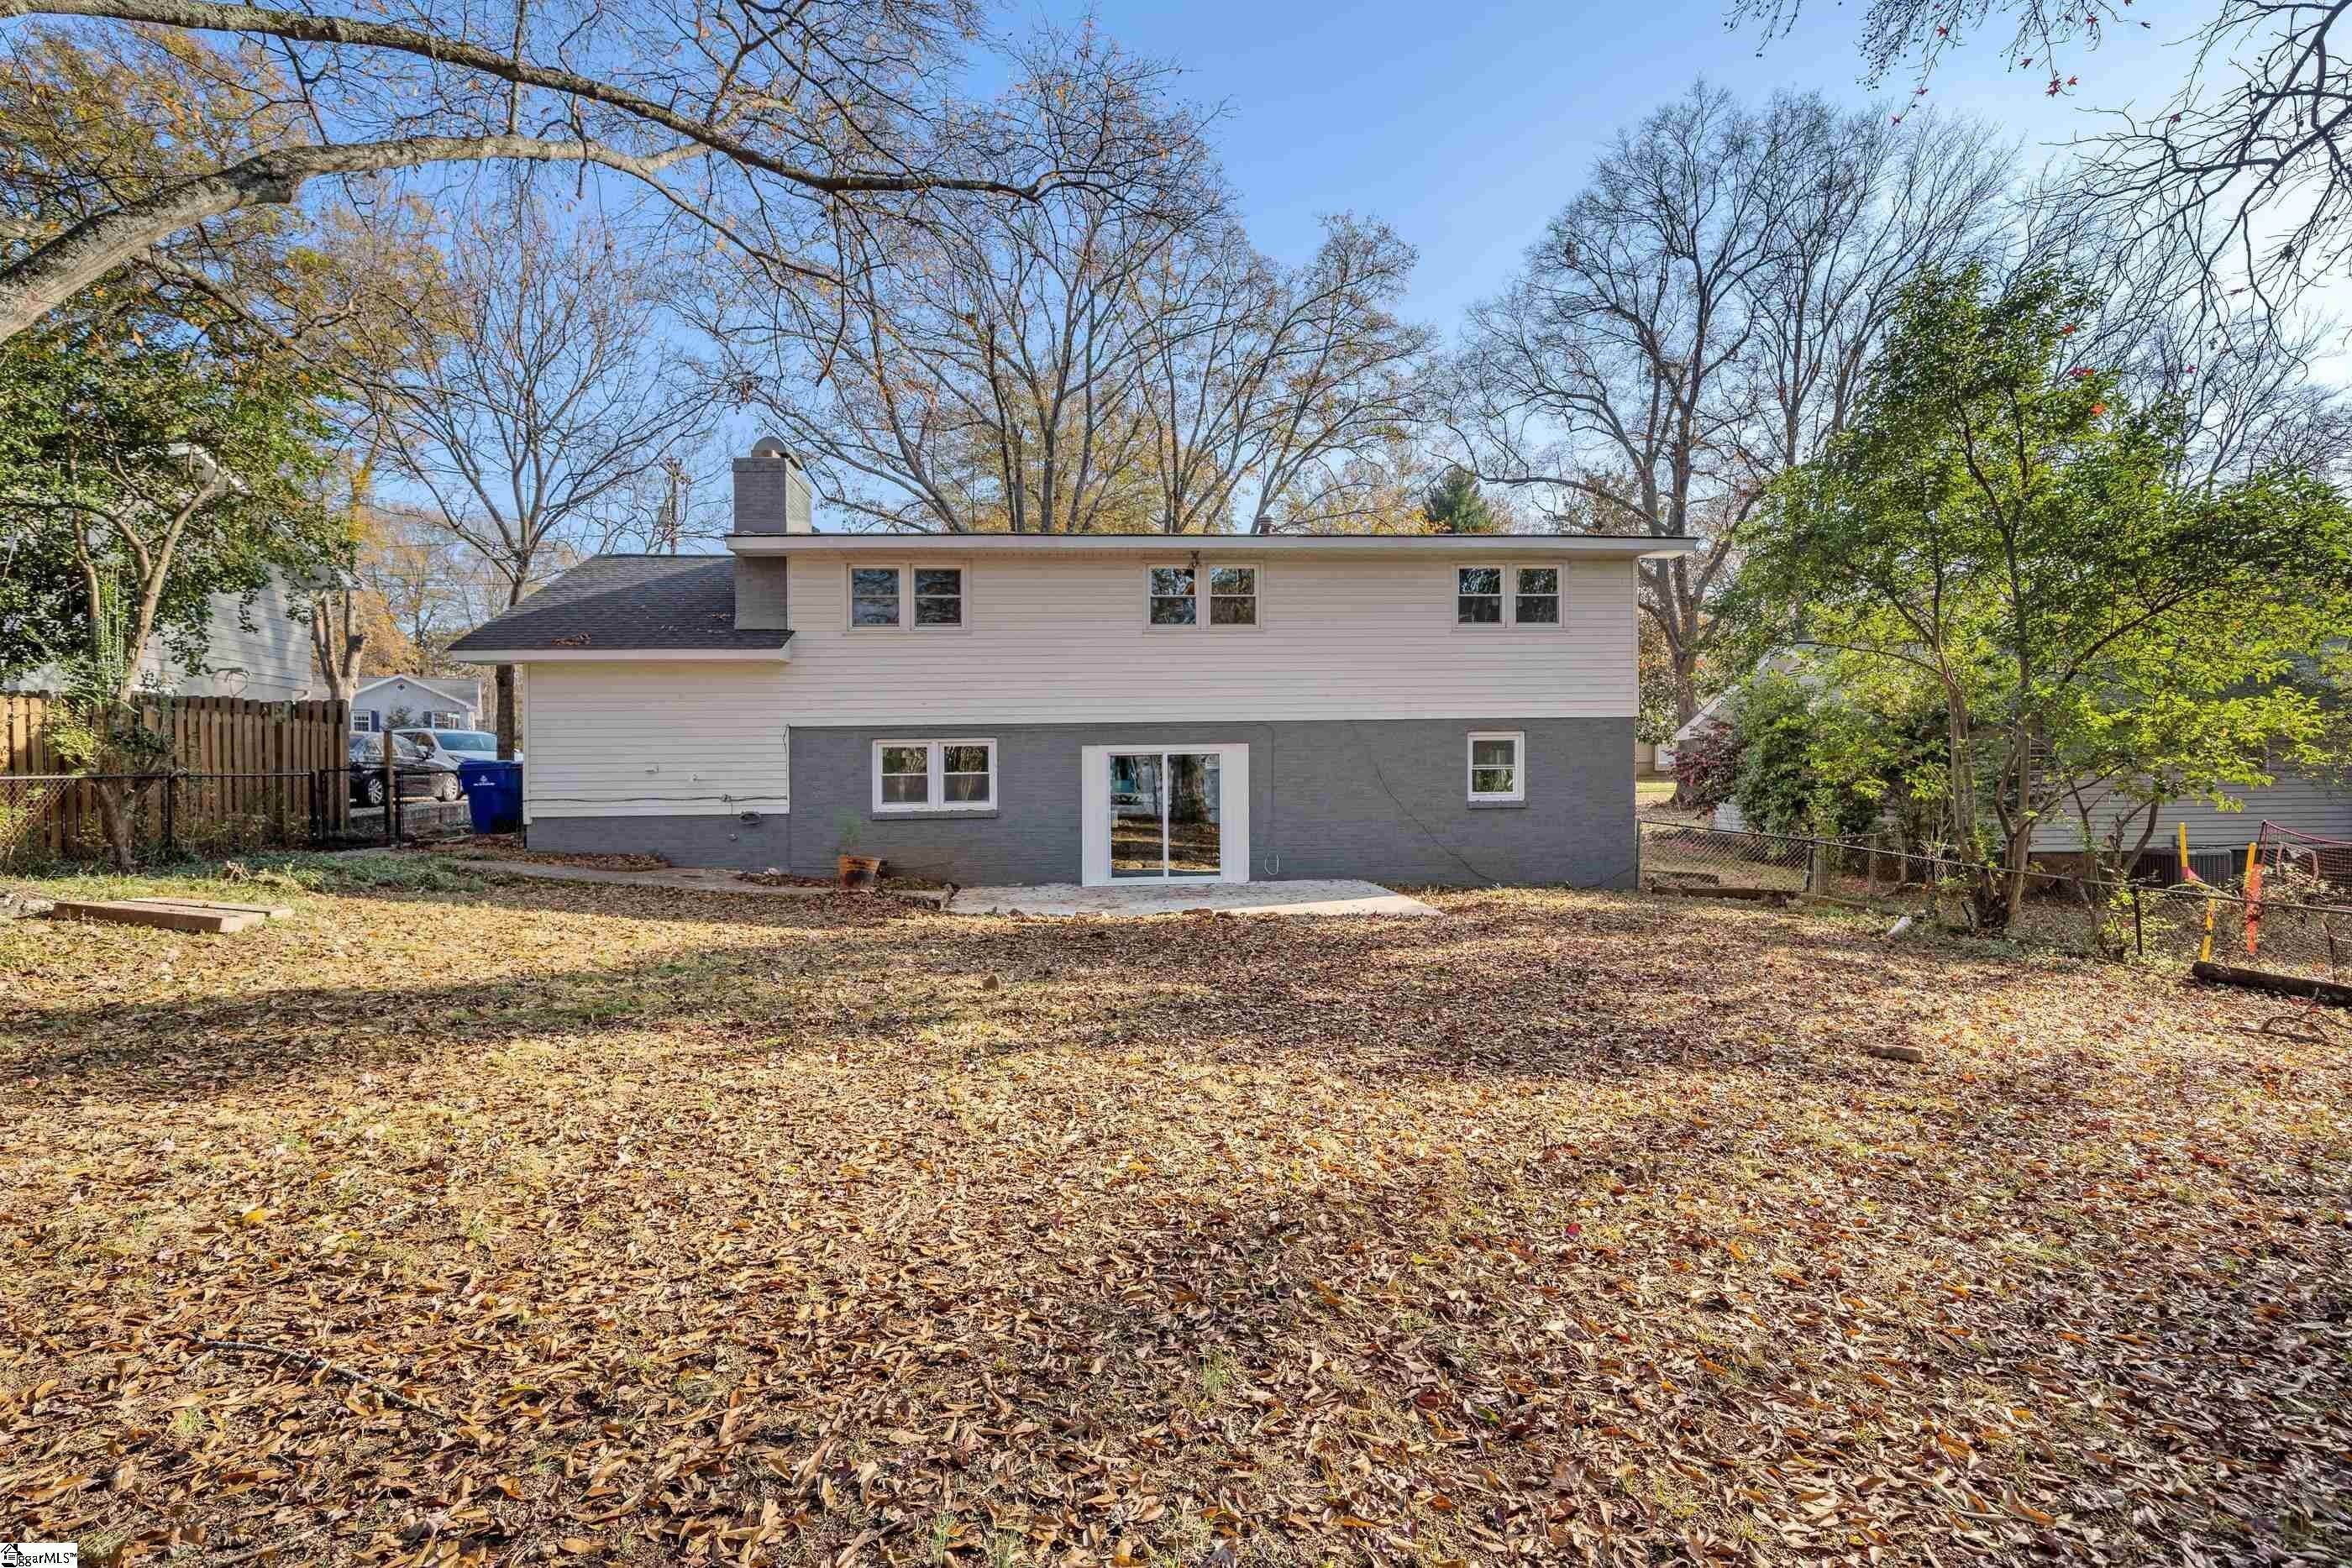 30. Single Family for Sale at Greenville, SC 29607